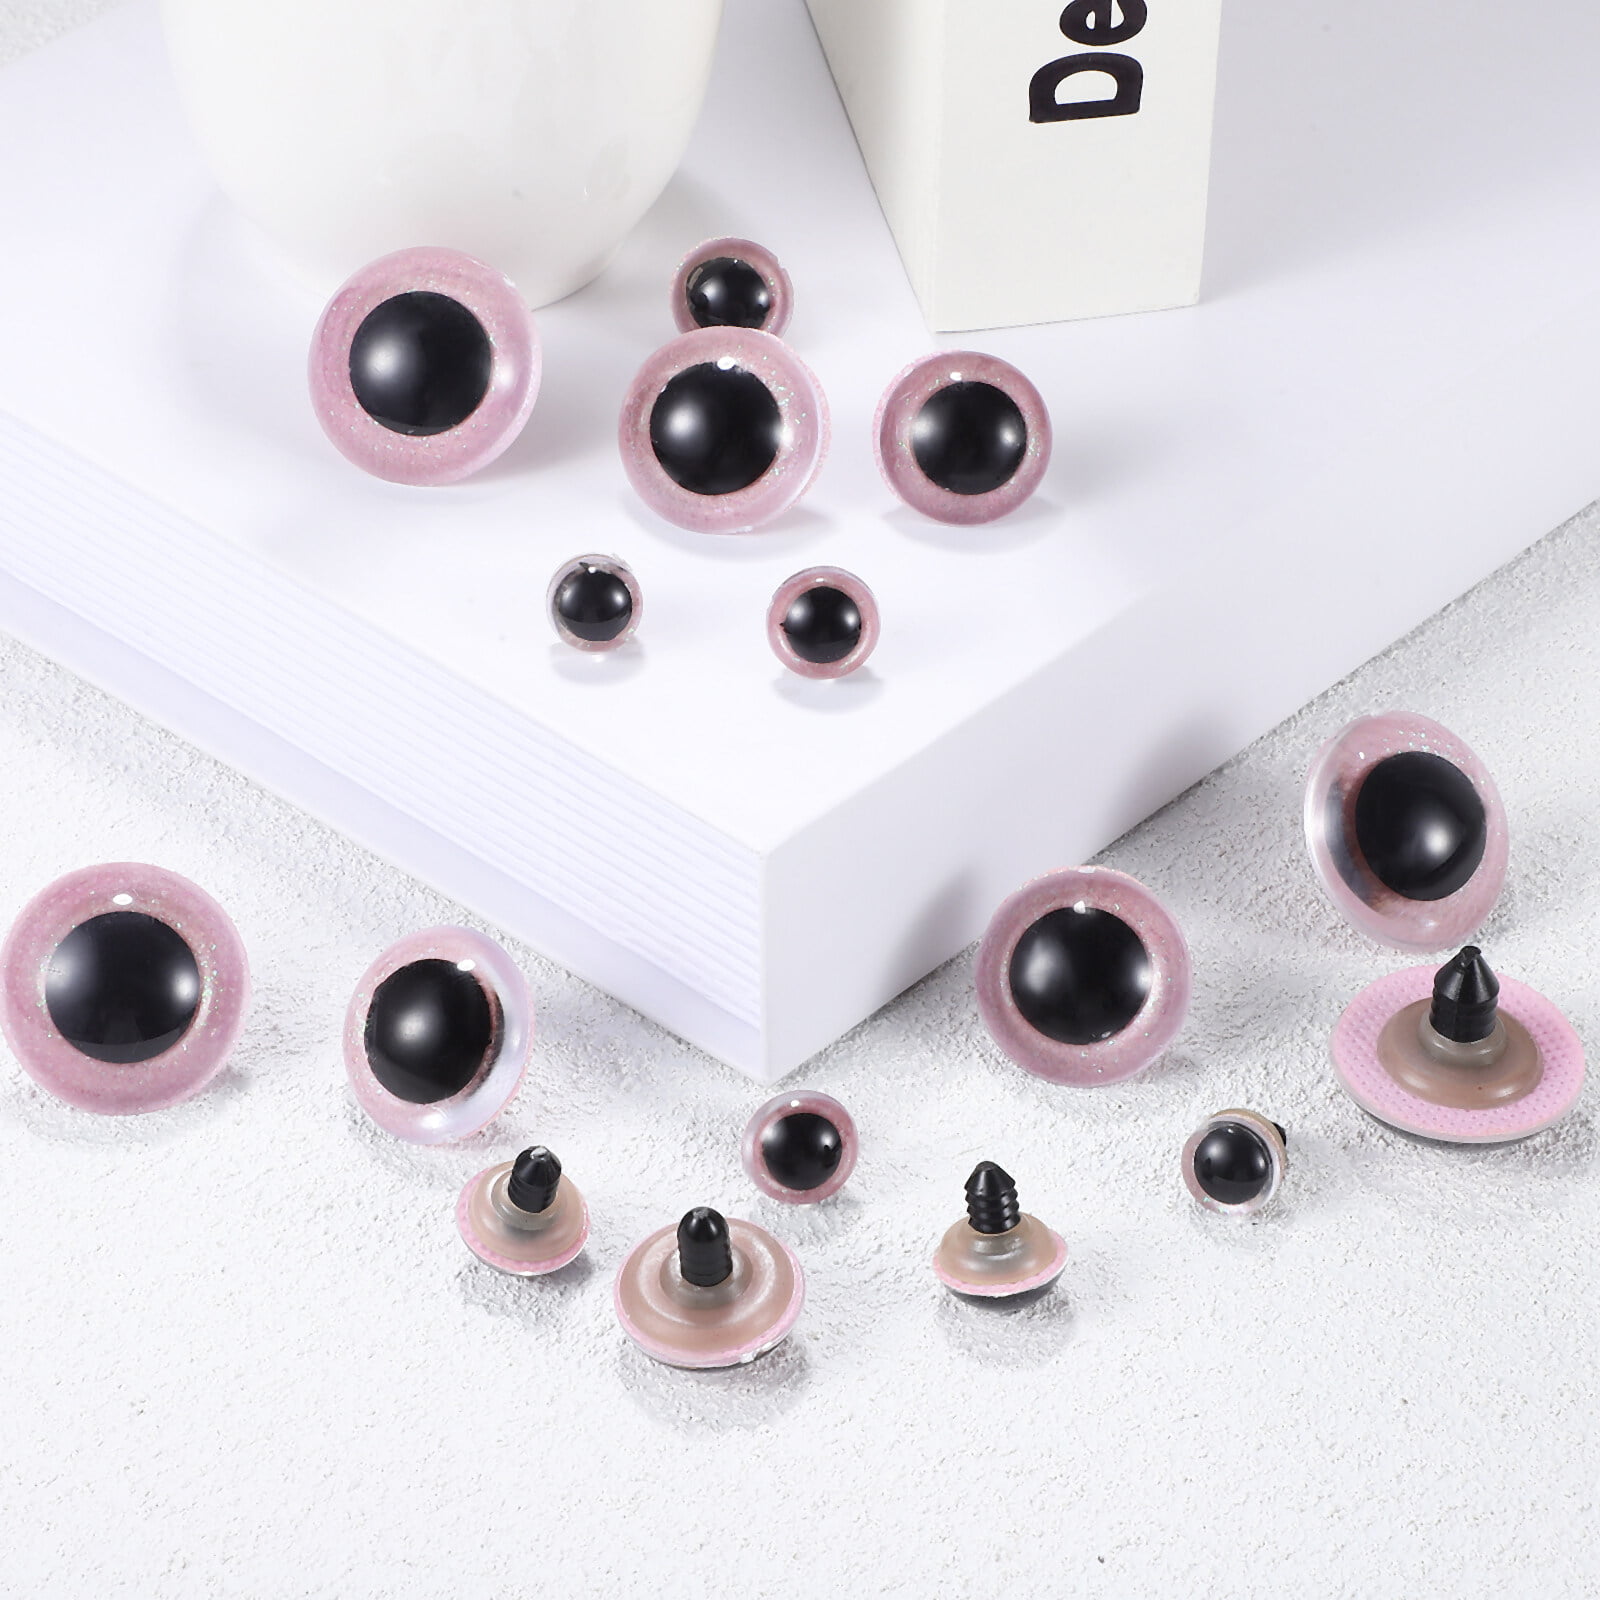 5Pairs Colorful Plastic Safty Glitter Glass Eyes For Toys Crafts